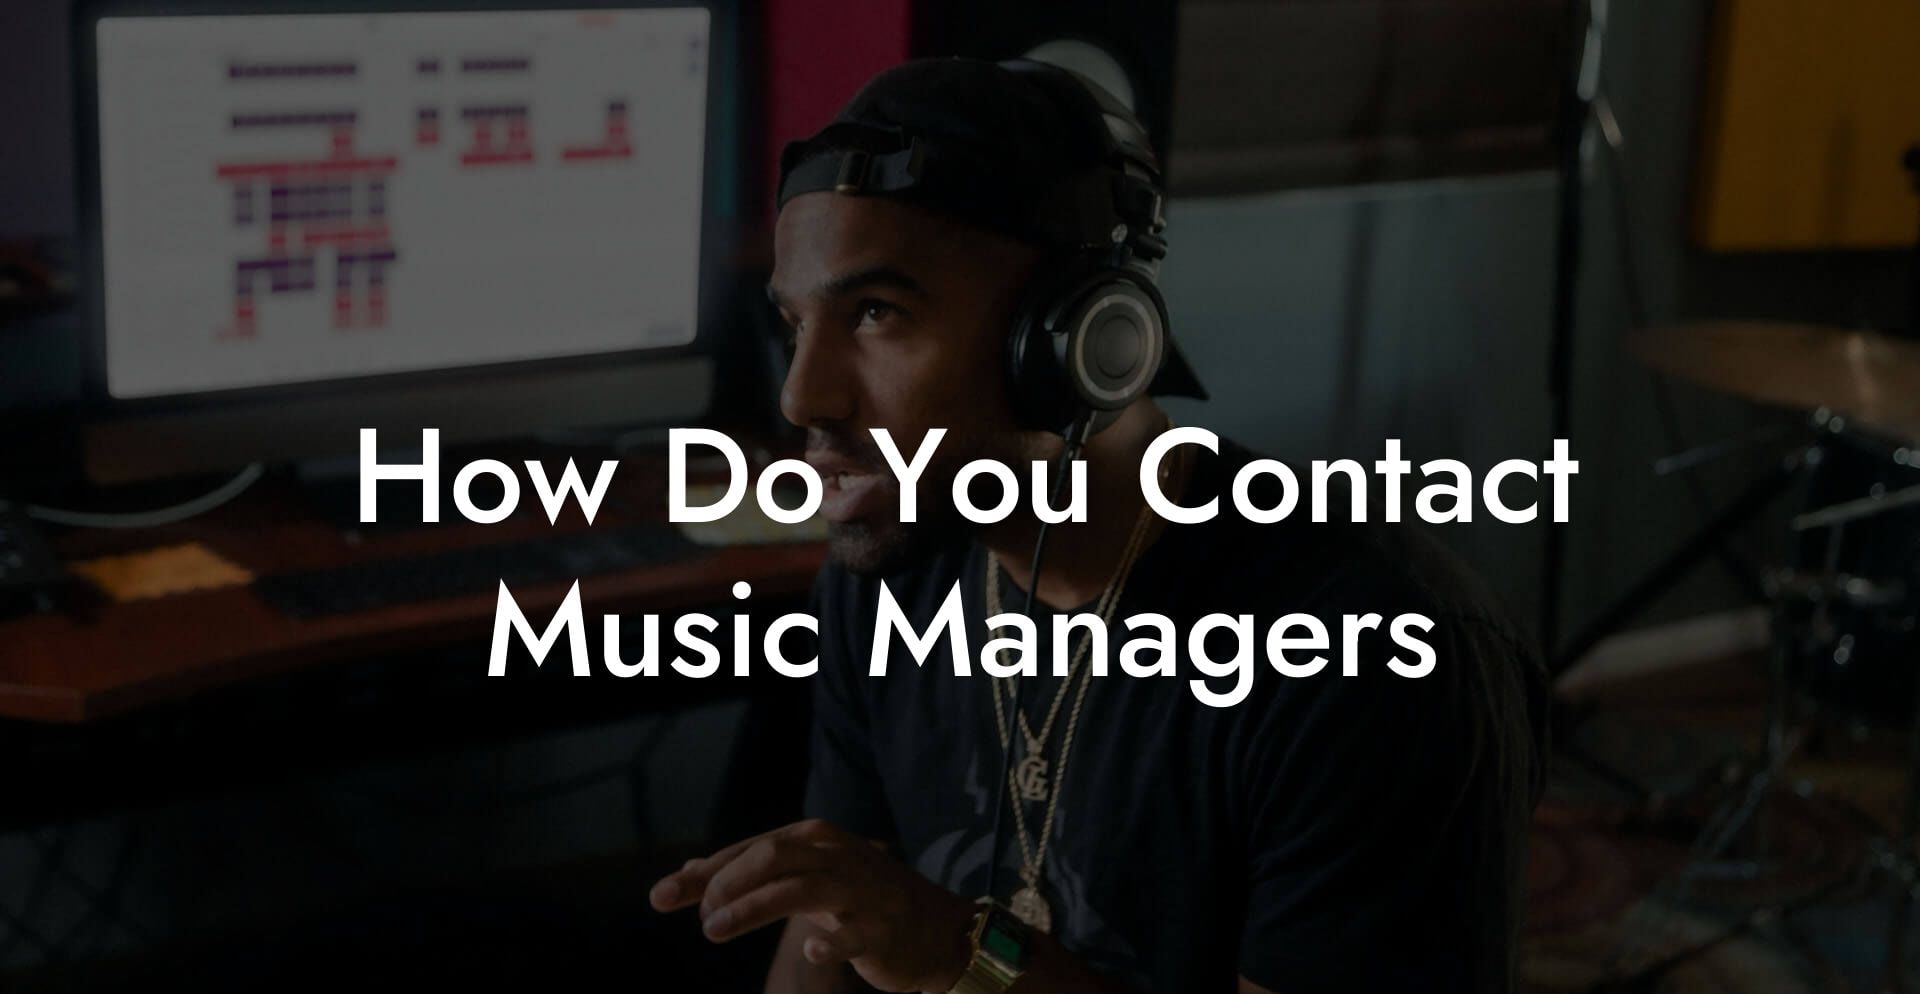 How Do You Contact Music Managers